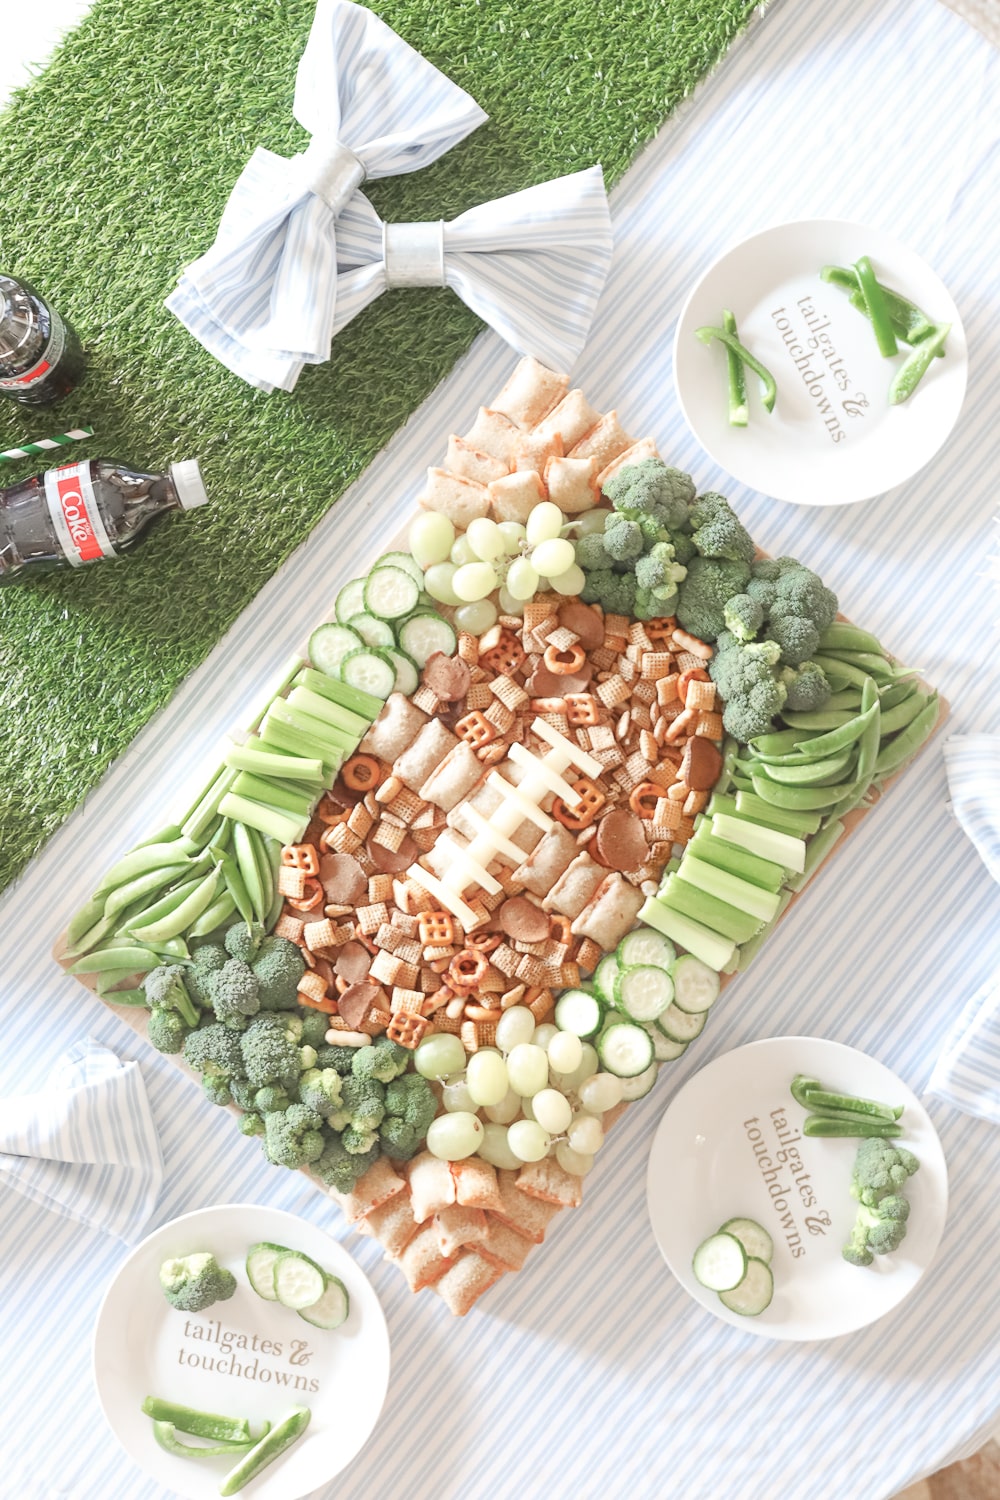 Blogger Stephanie Ziajka shows how to create a game day grazing board with green grapes, green veggies, Chex Mix, and Totino's Pizza Rolls on Diary of a Debutante